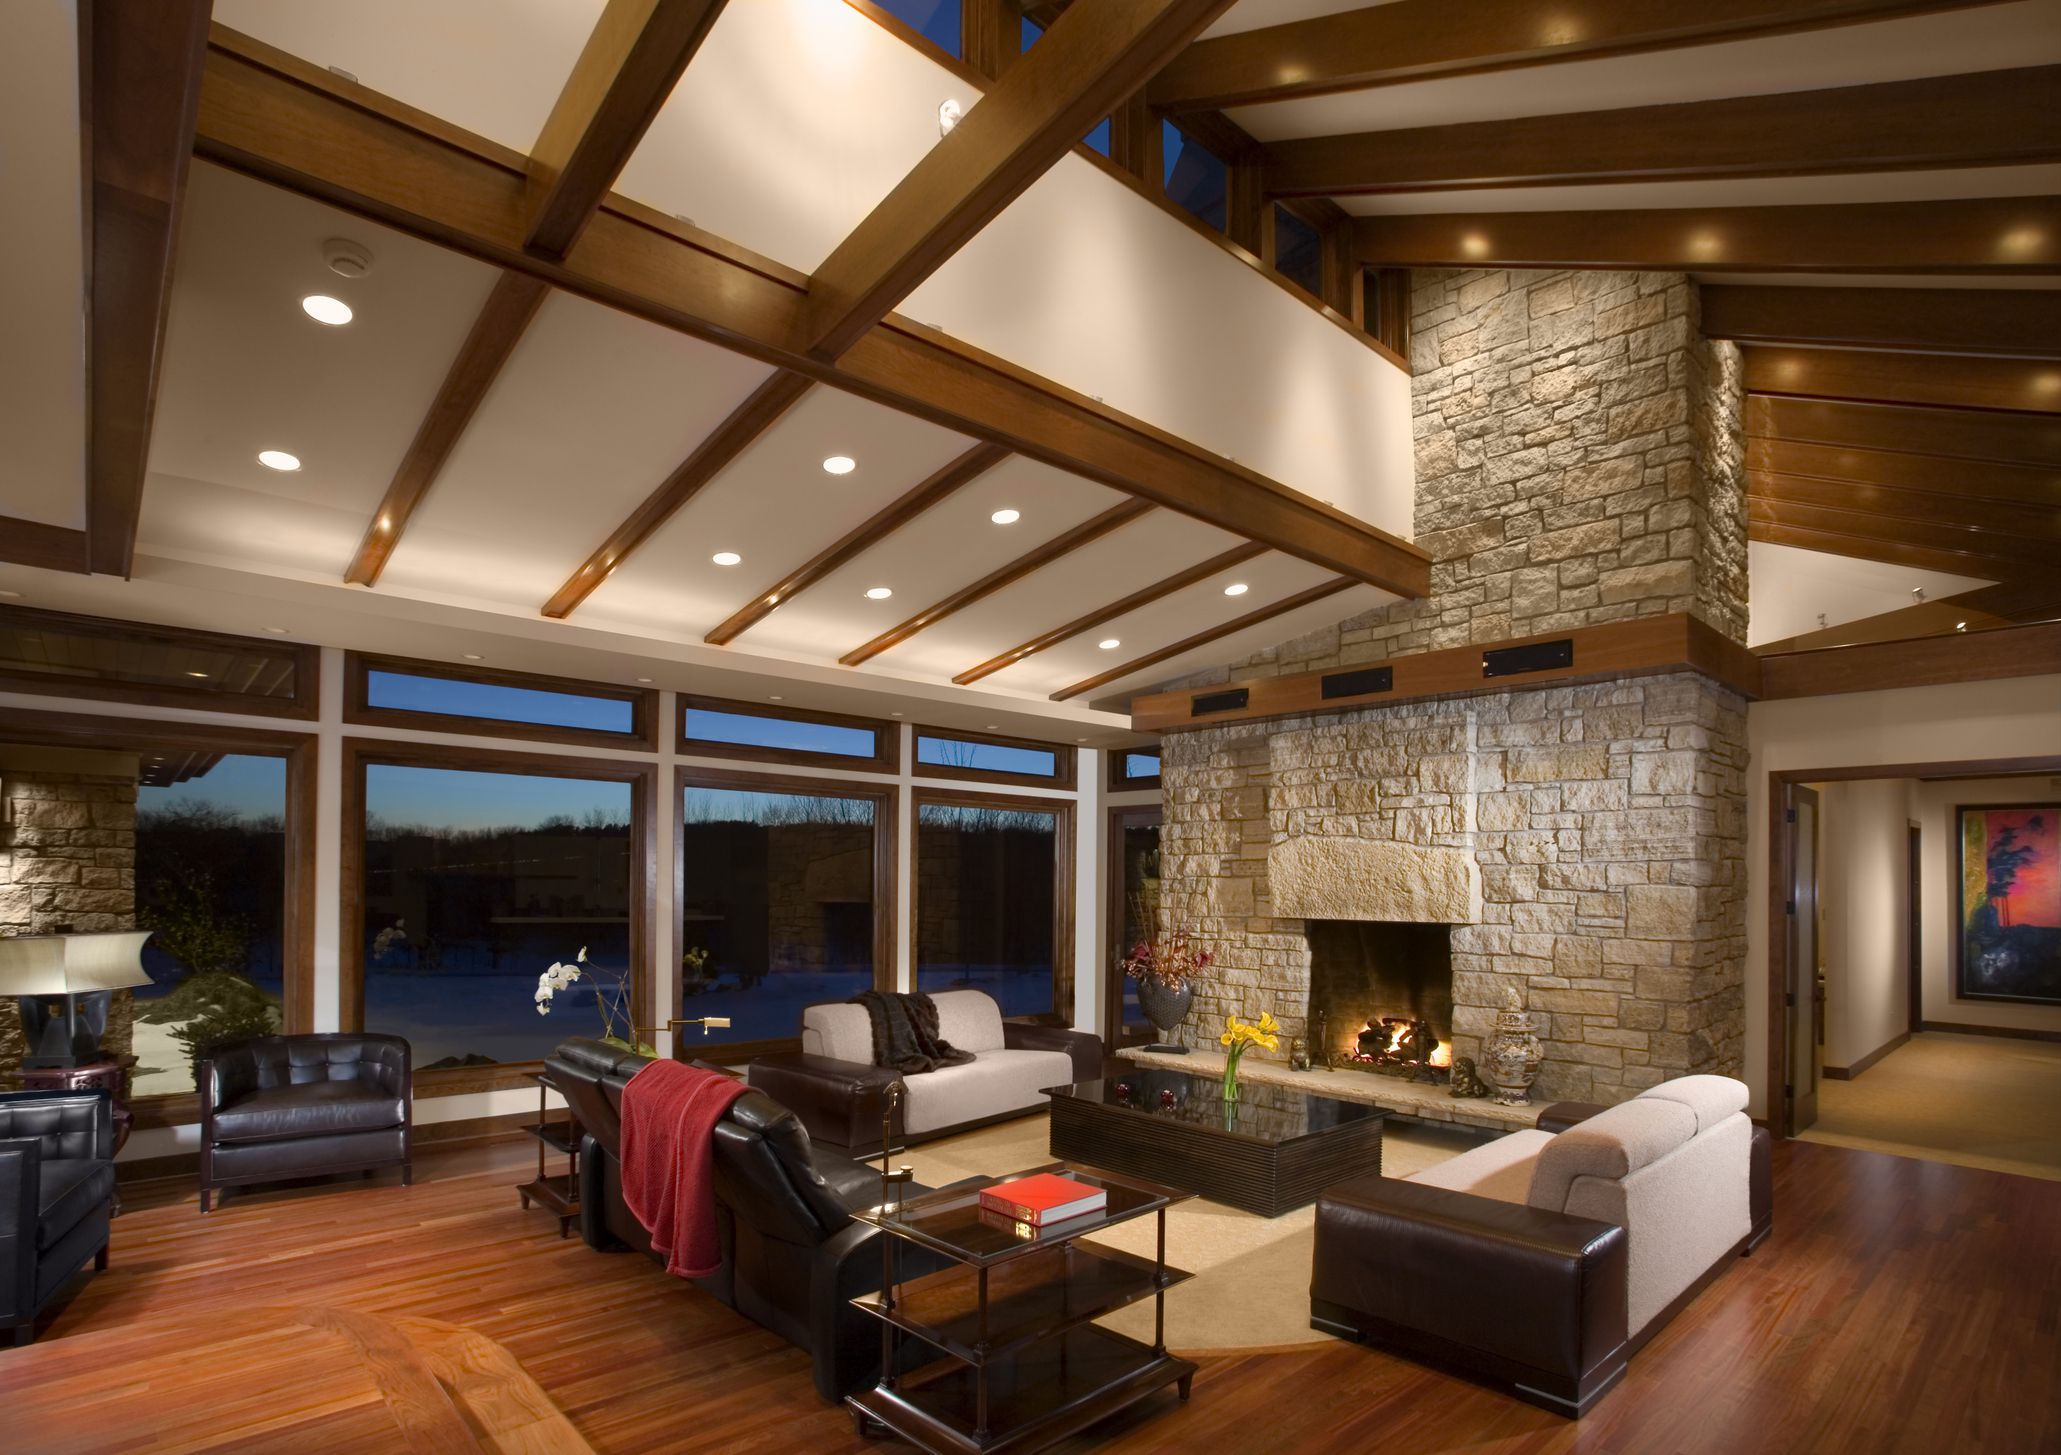 Vaulted Ceilings - Pros and Cons, Myths and Truths